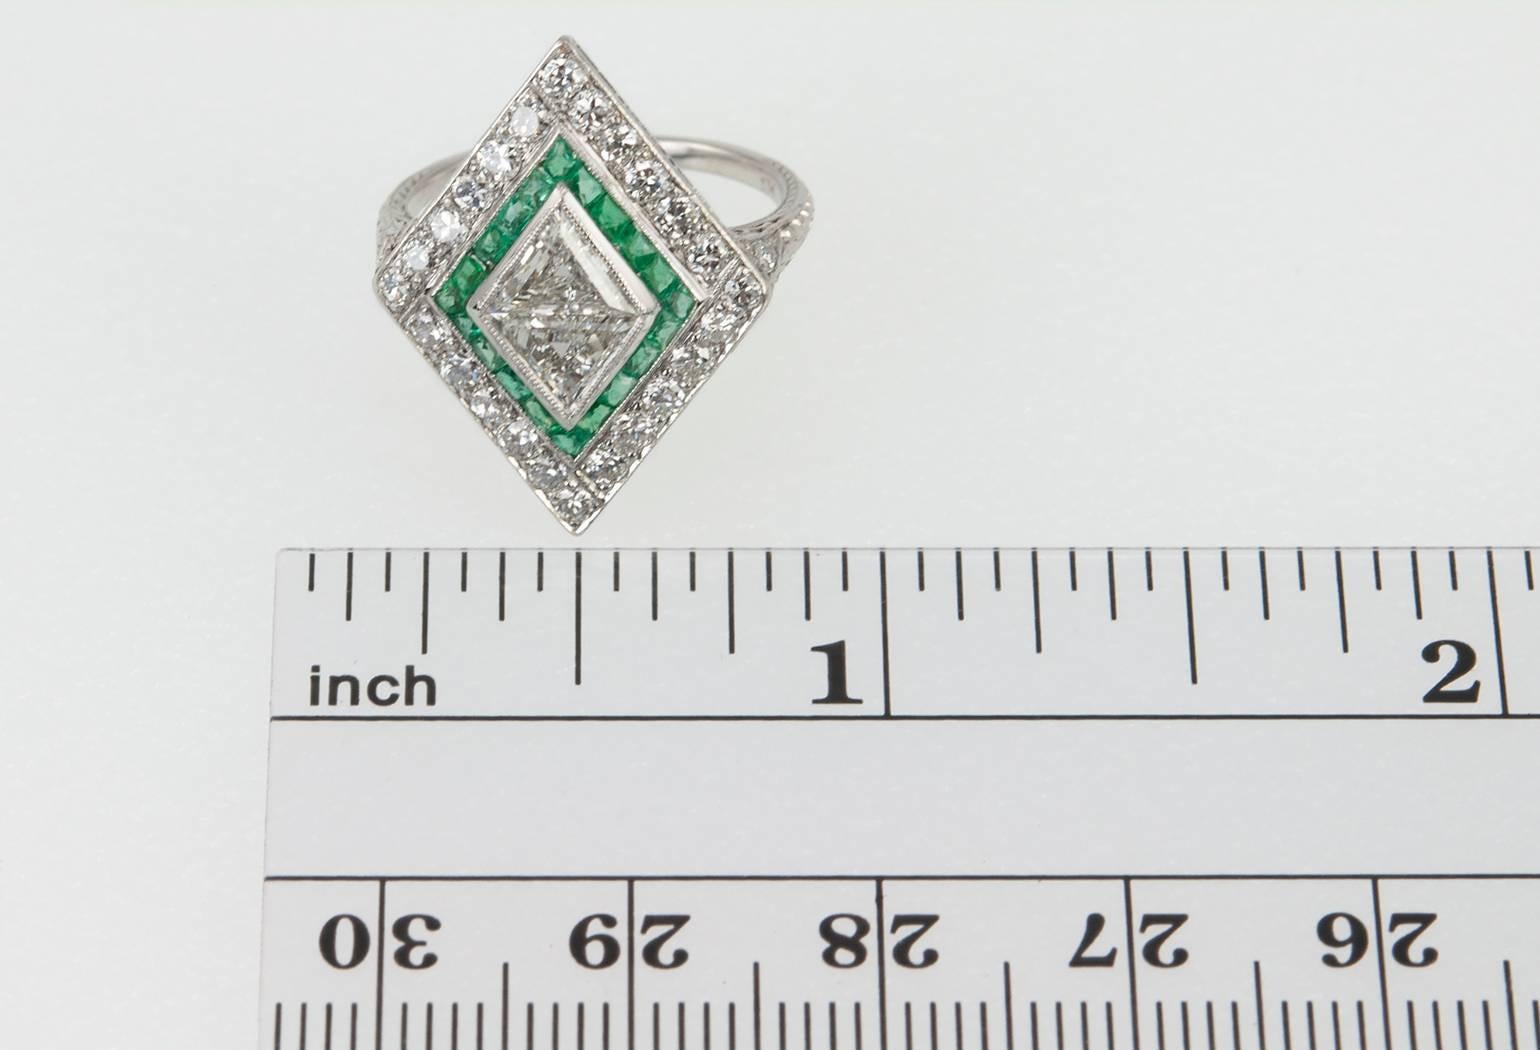 A gorgeous diamond and emerald kite-shaped platinum ring! This ring features 2 trillion cut diamonds, one diamond is 0.34 carats G in color and SI1 in clarity and the other is 0.40 carats G in color and VS2 in clarity (per EGL certificates). The